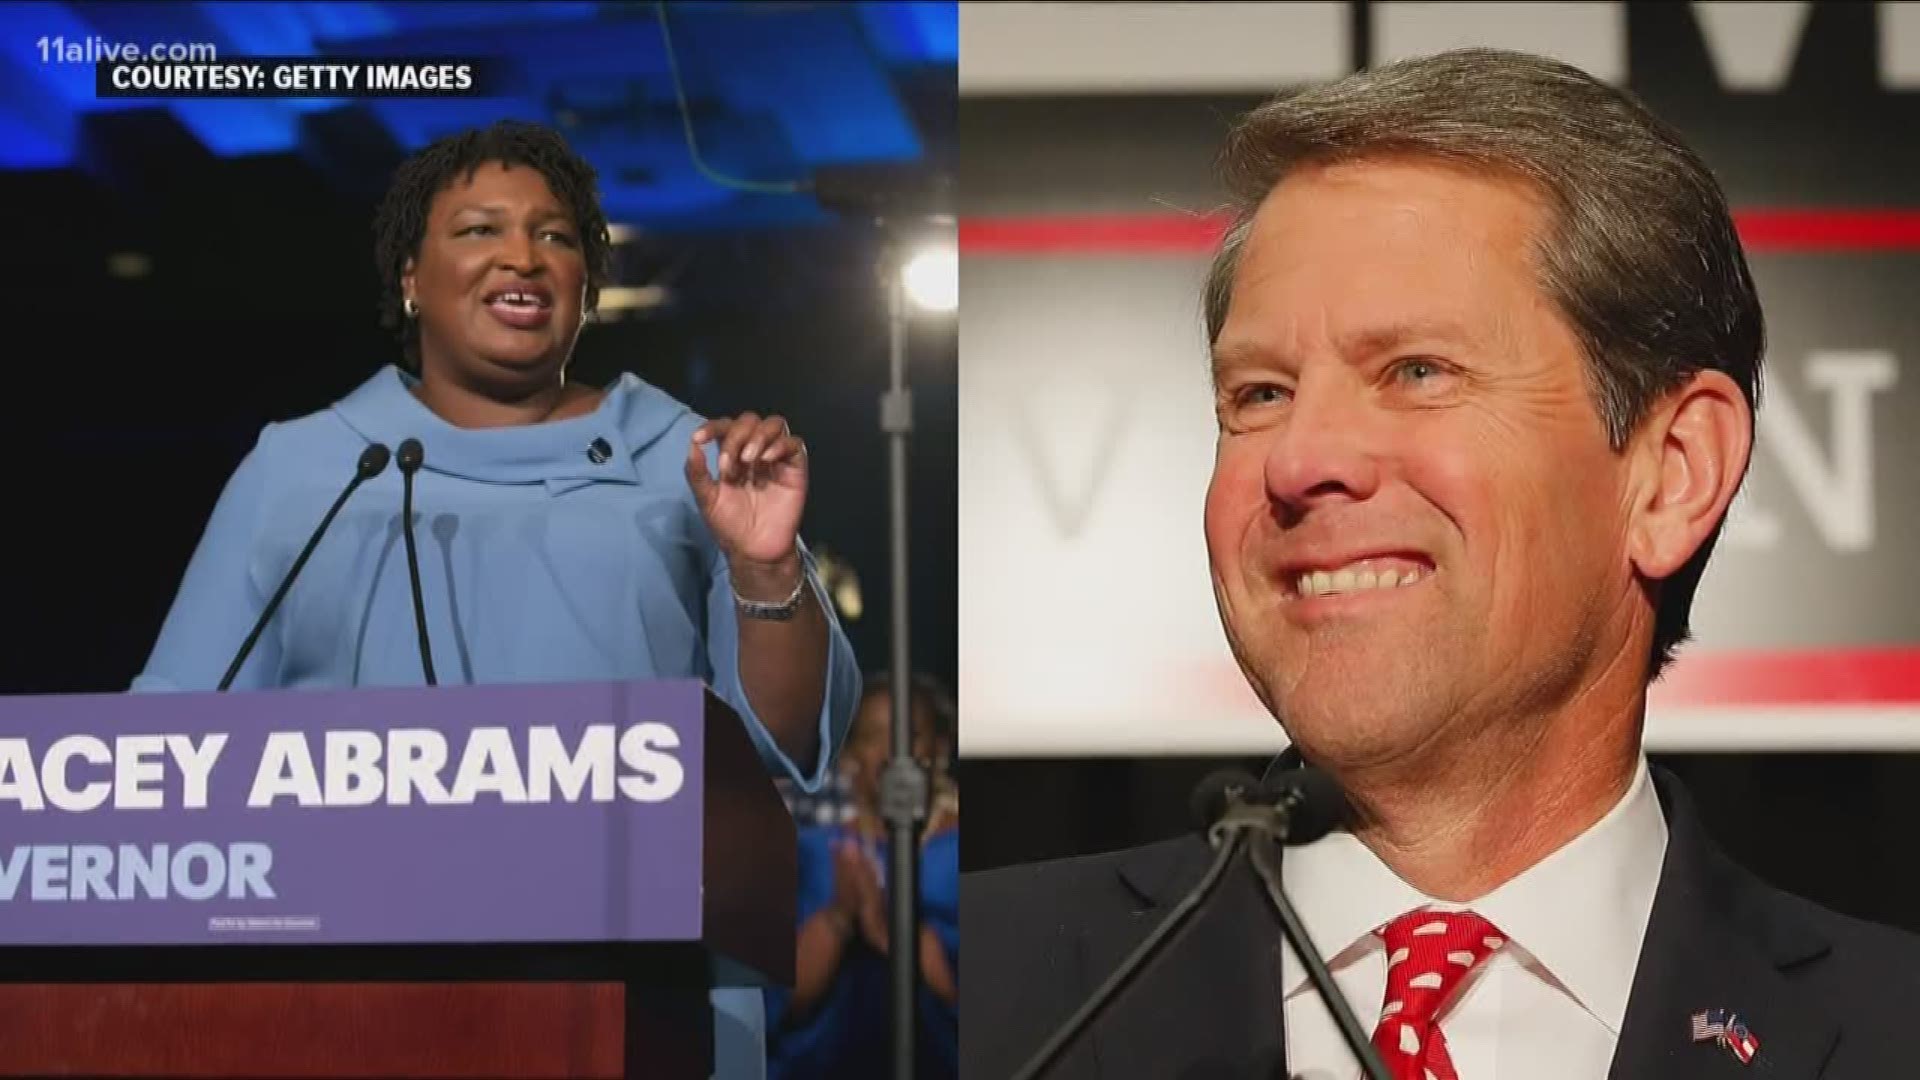 While Republican Brian Kemp has declared himself the winner of the election, his Democratic challenger Stacey Abrams has vowed not to concede until every vote is counted - even if it means filing suit.